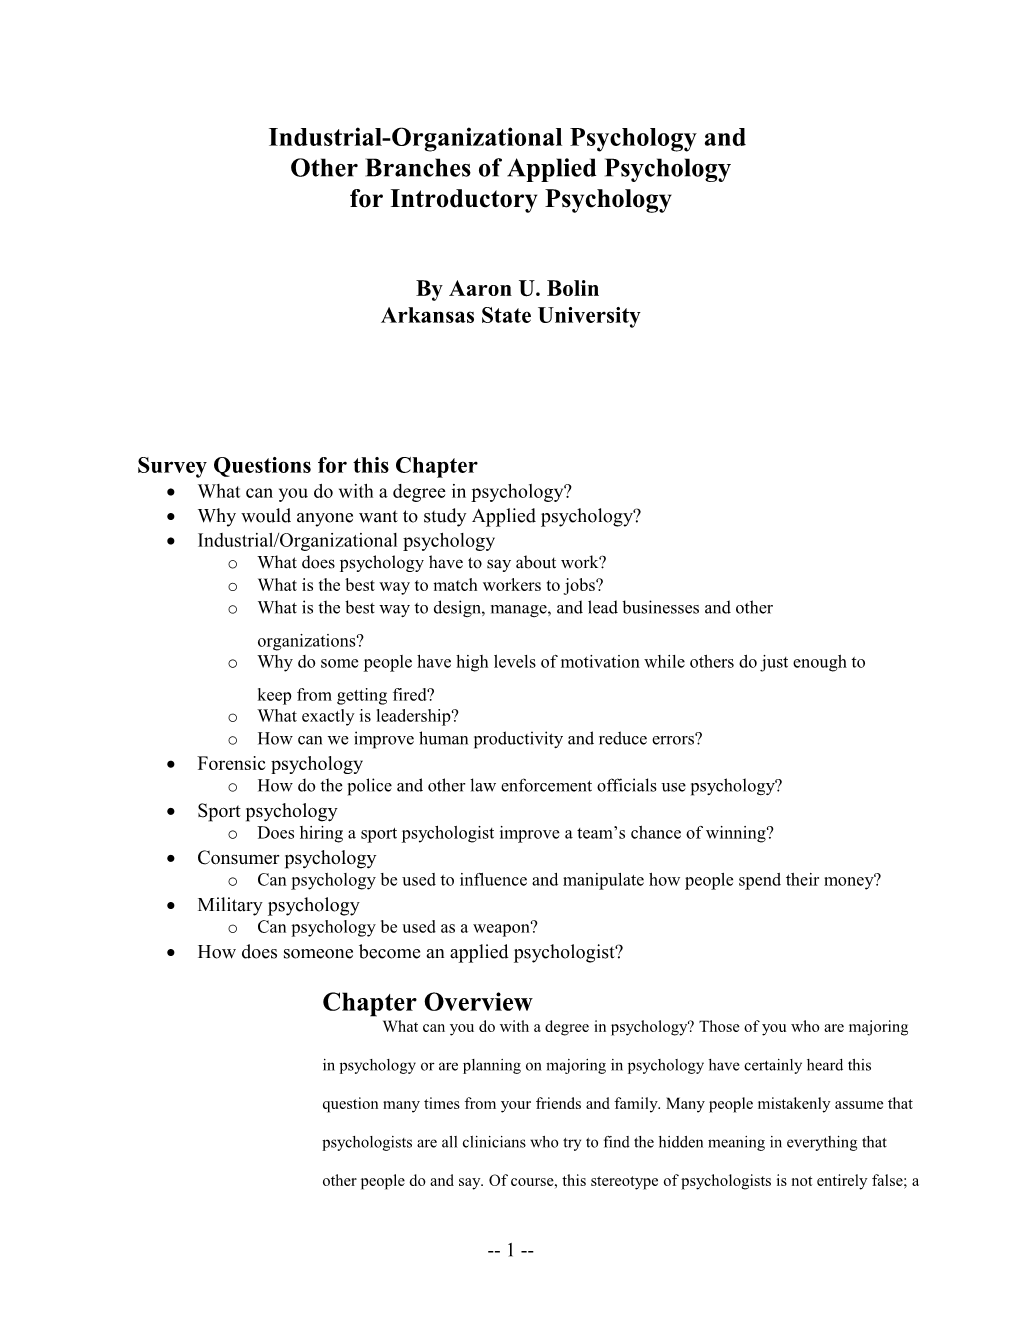 IO Chapter for Intro to Psychology